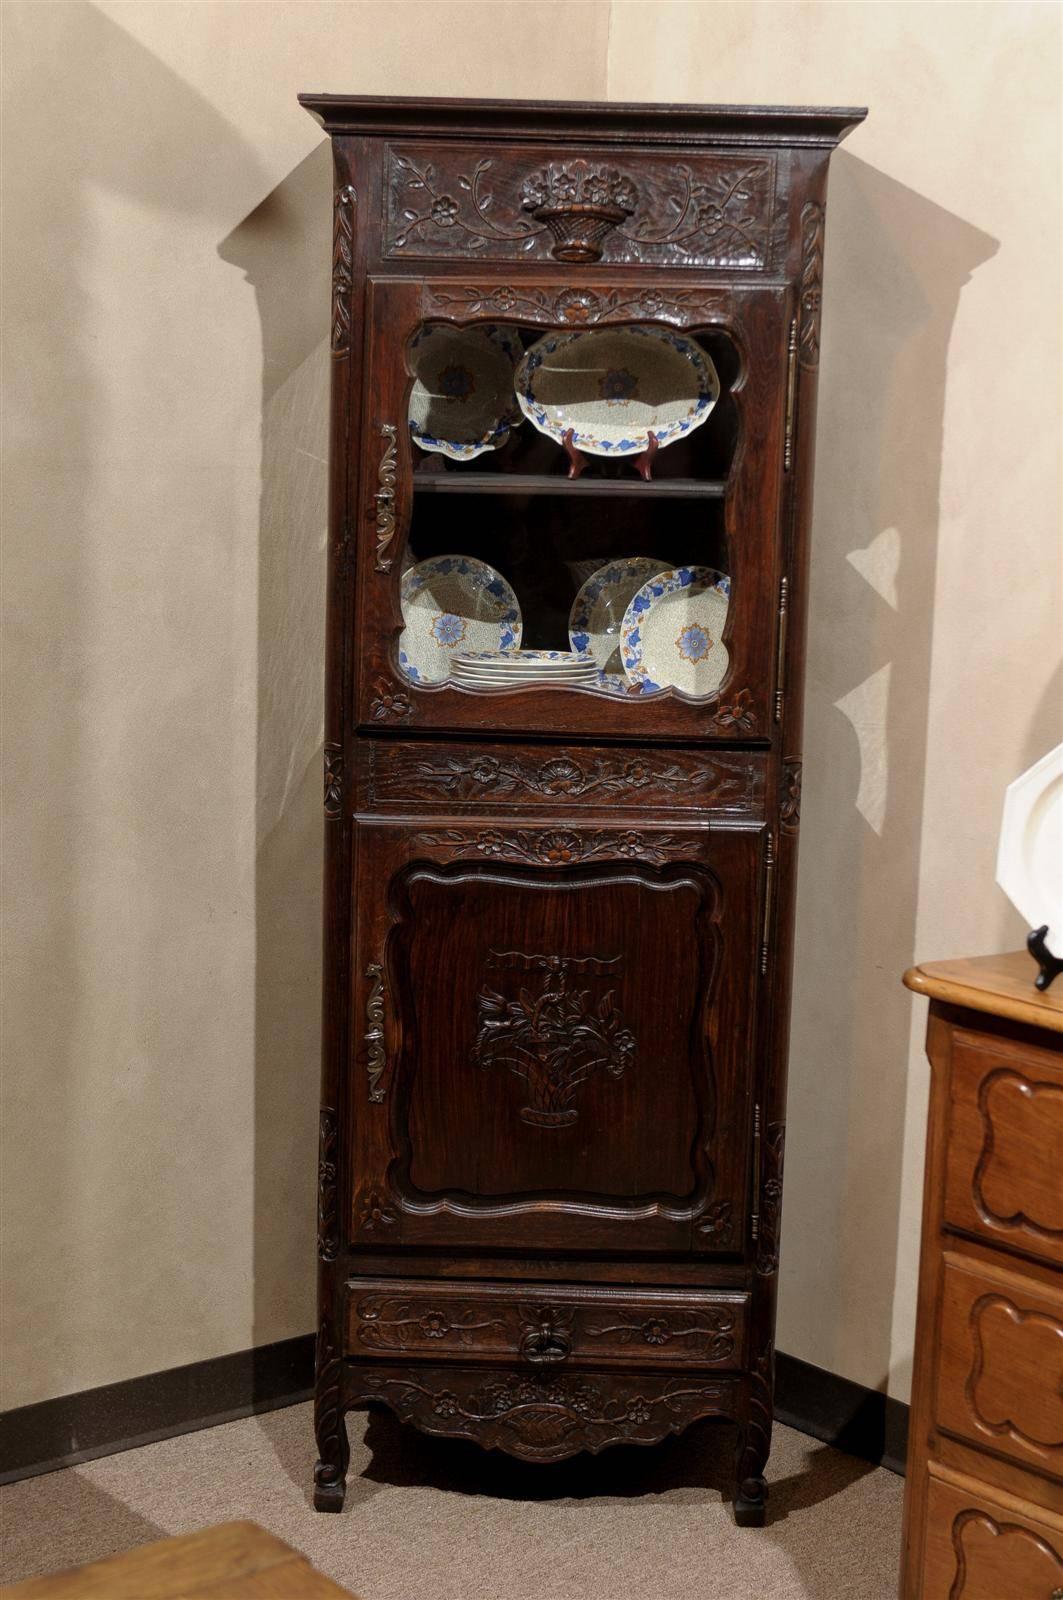 There are many wonderful options for using a piece of these proportions.  Often there is a small, narrow spot in a room that needs something of interest and this little piece with the very pretty carving and display space can help.  Other